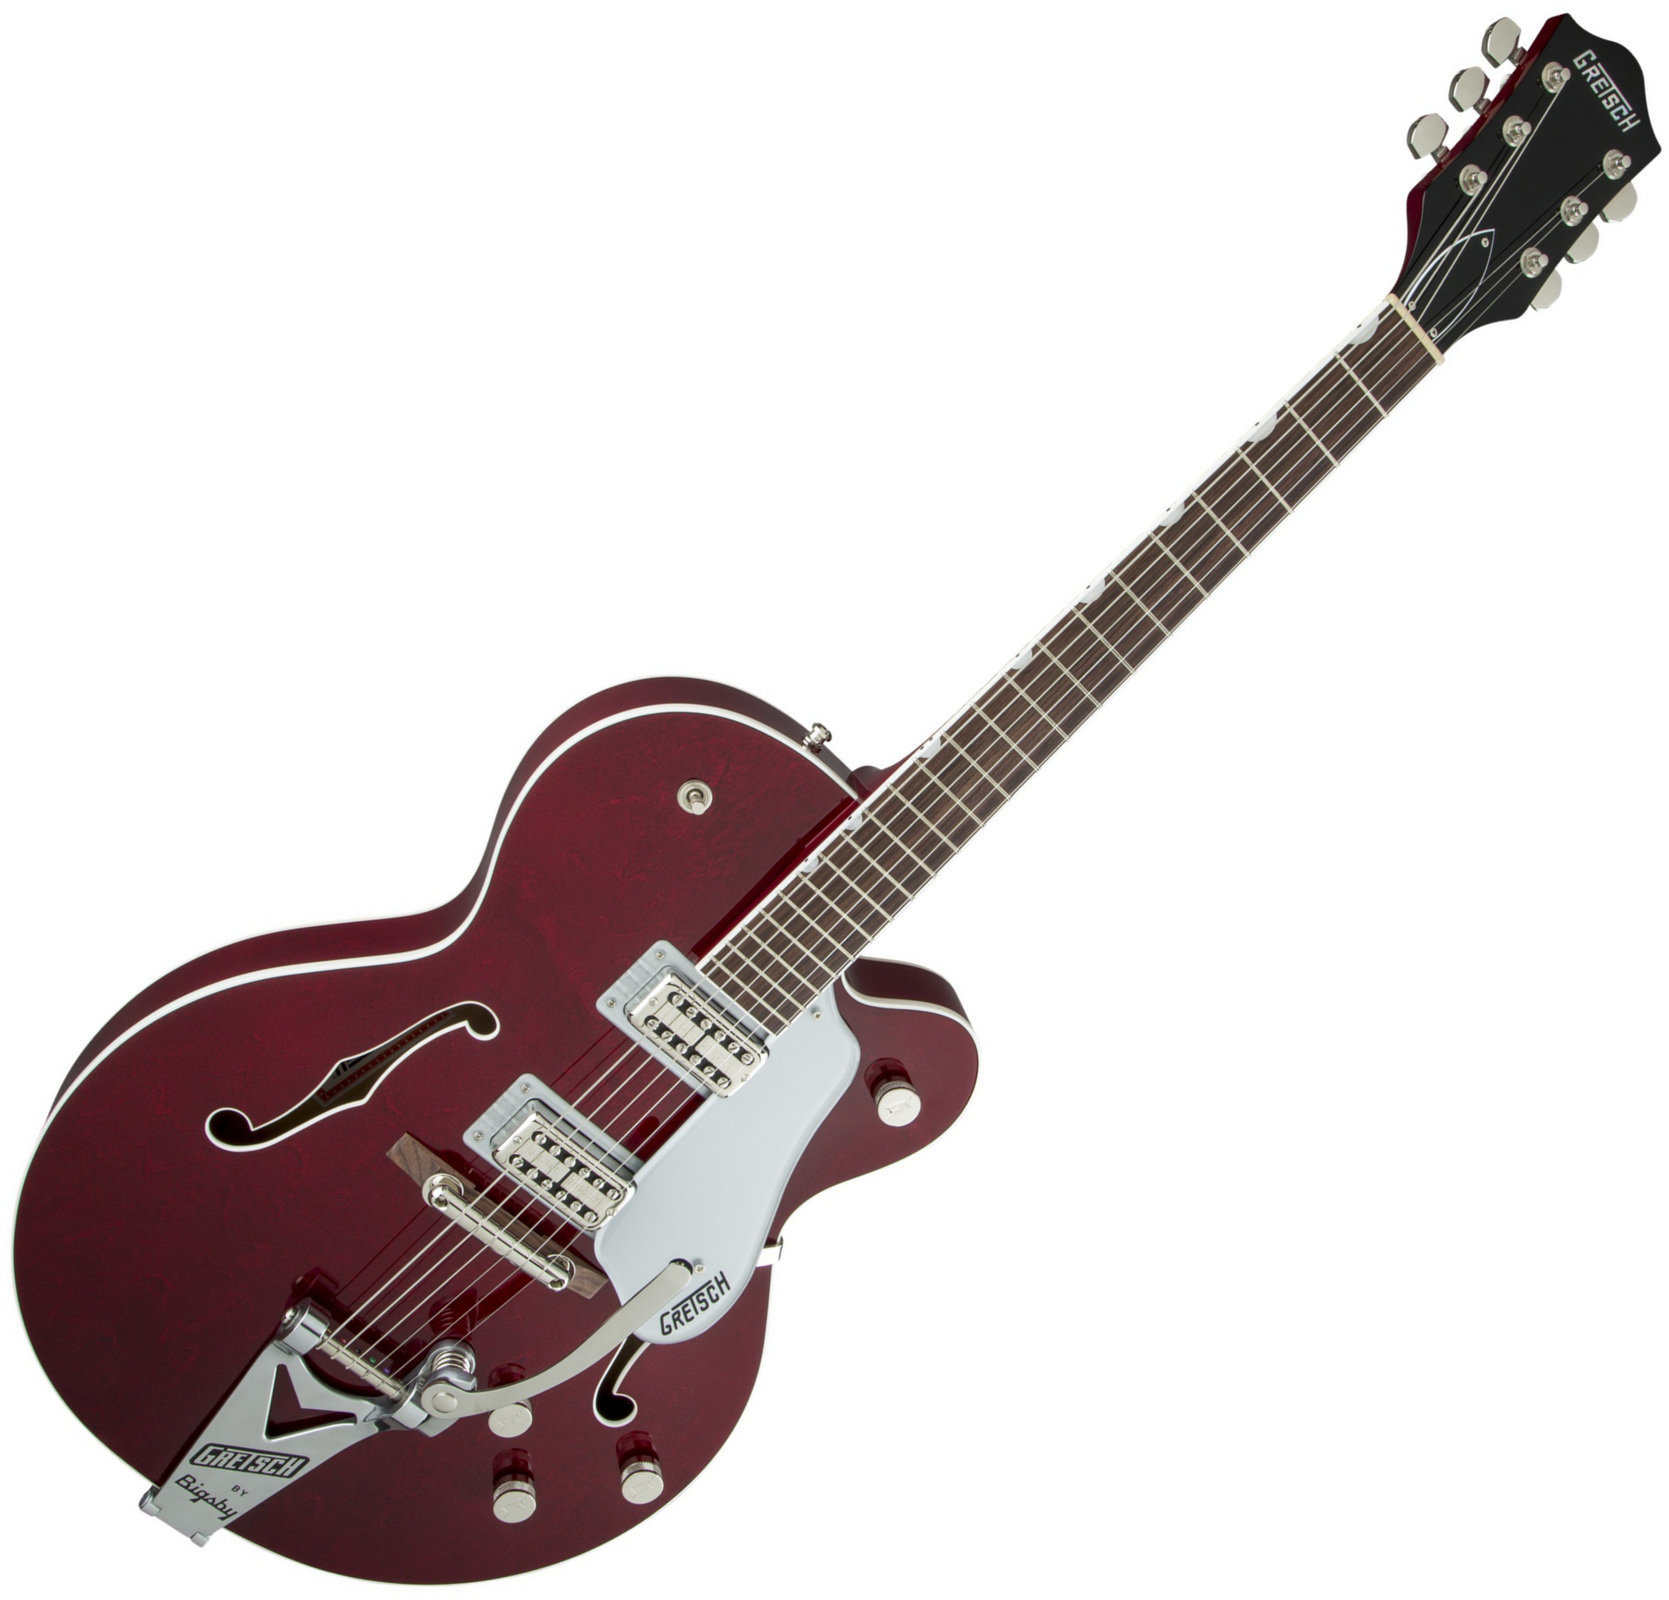 Guitare semi-acoustique Gretsch G6119 Professional Players Edition Tennessee Rose RW Dark Cherry Stain